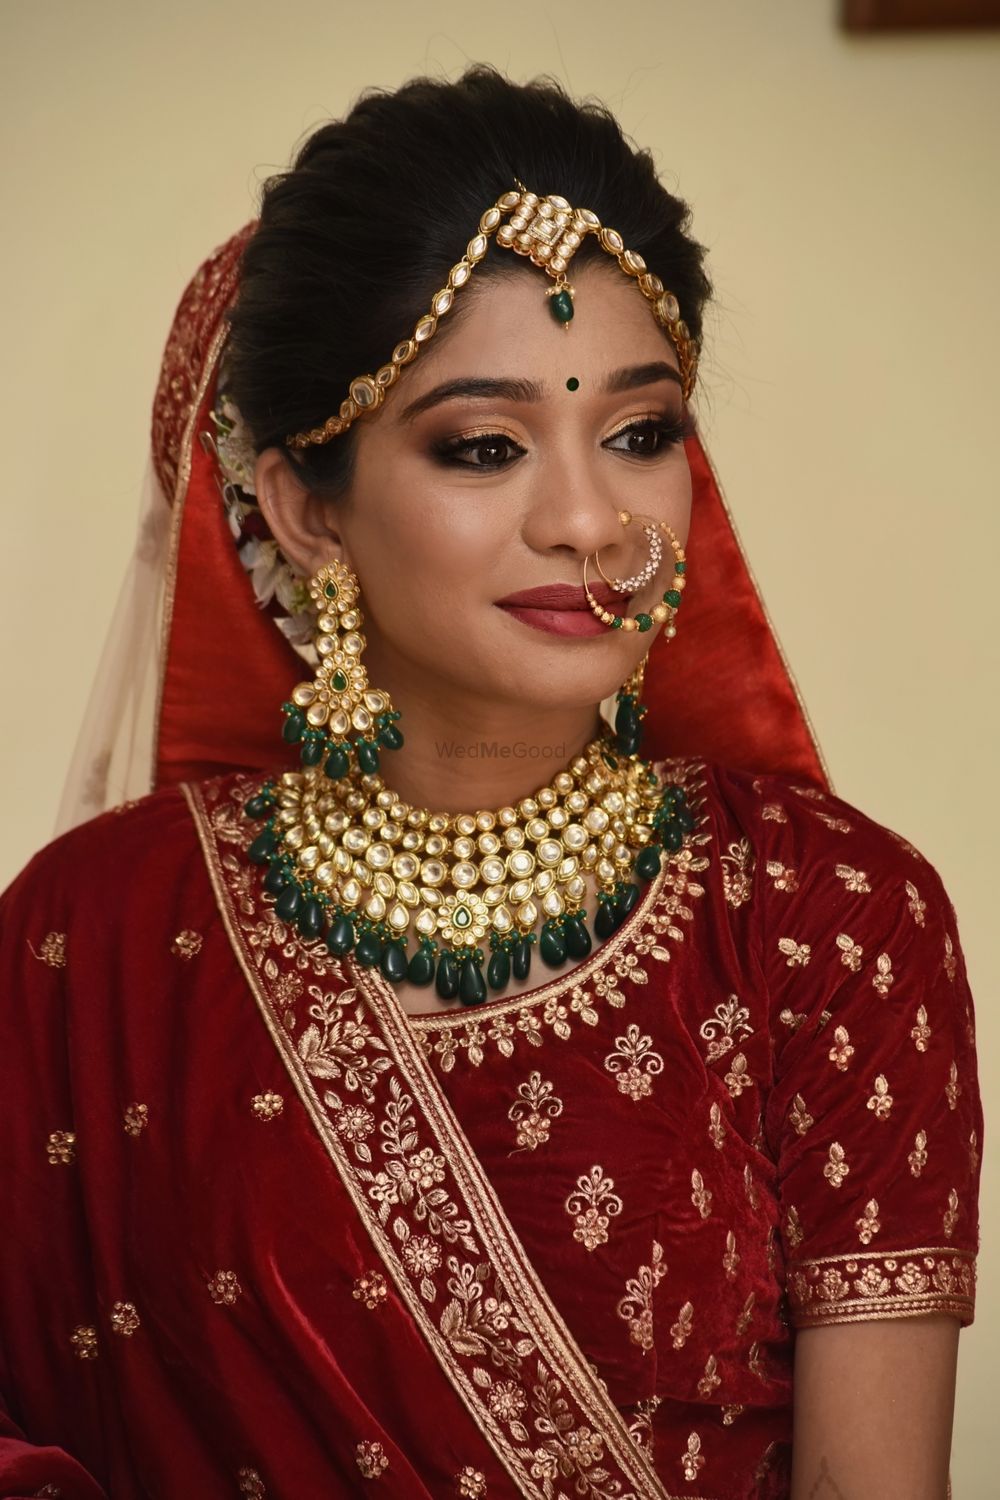 Photo From Brides - By Riddhi Trivedi